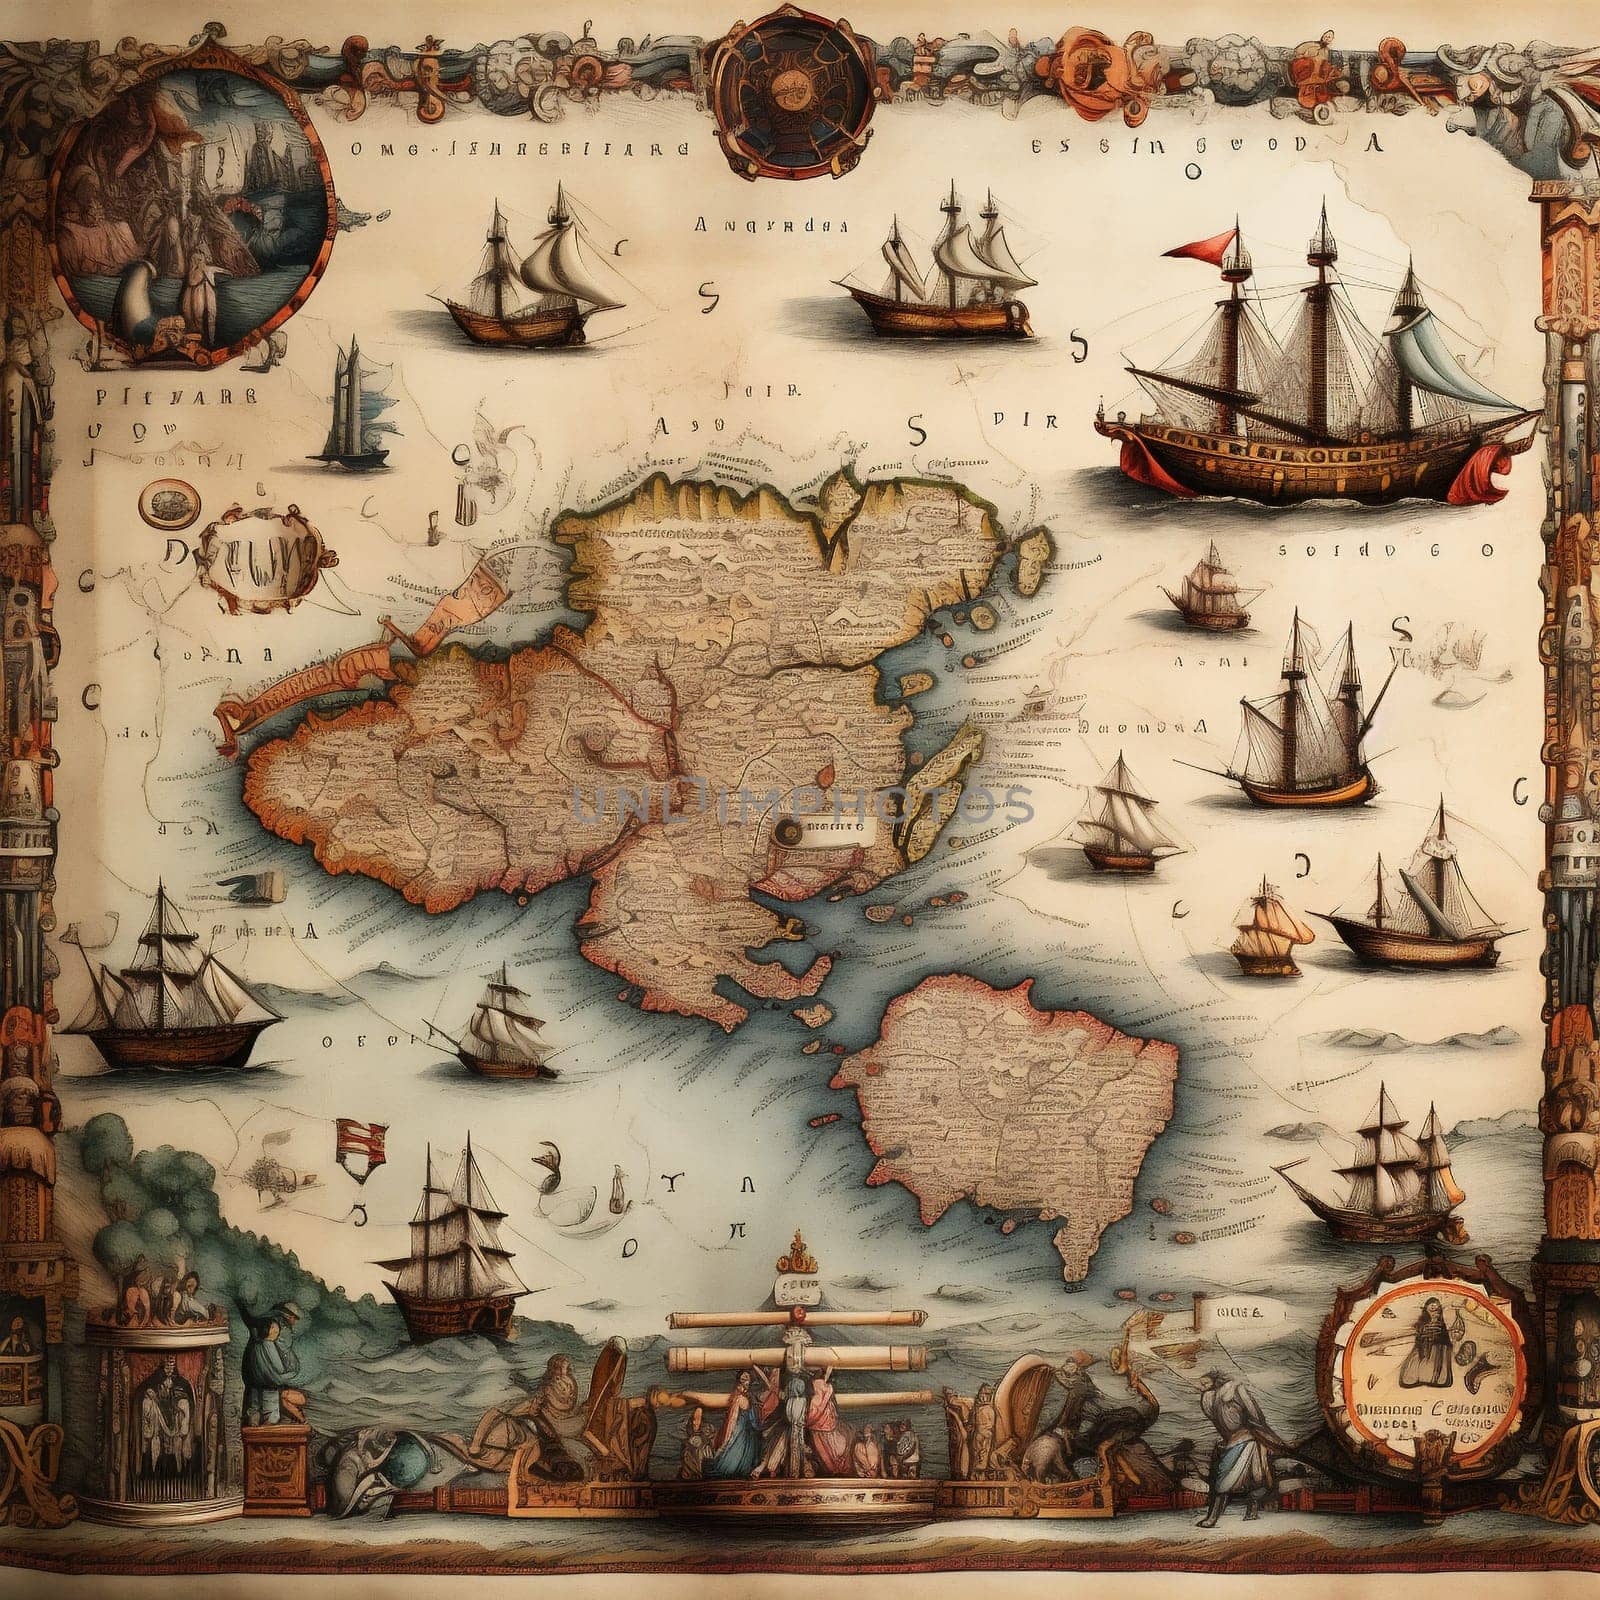 Vintage World Map on an Old Stained Parchment. Antique Old Map with Painted Ships.